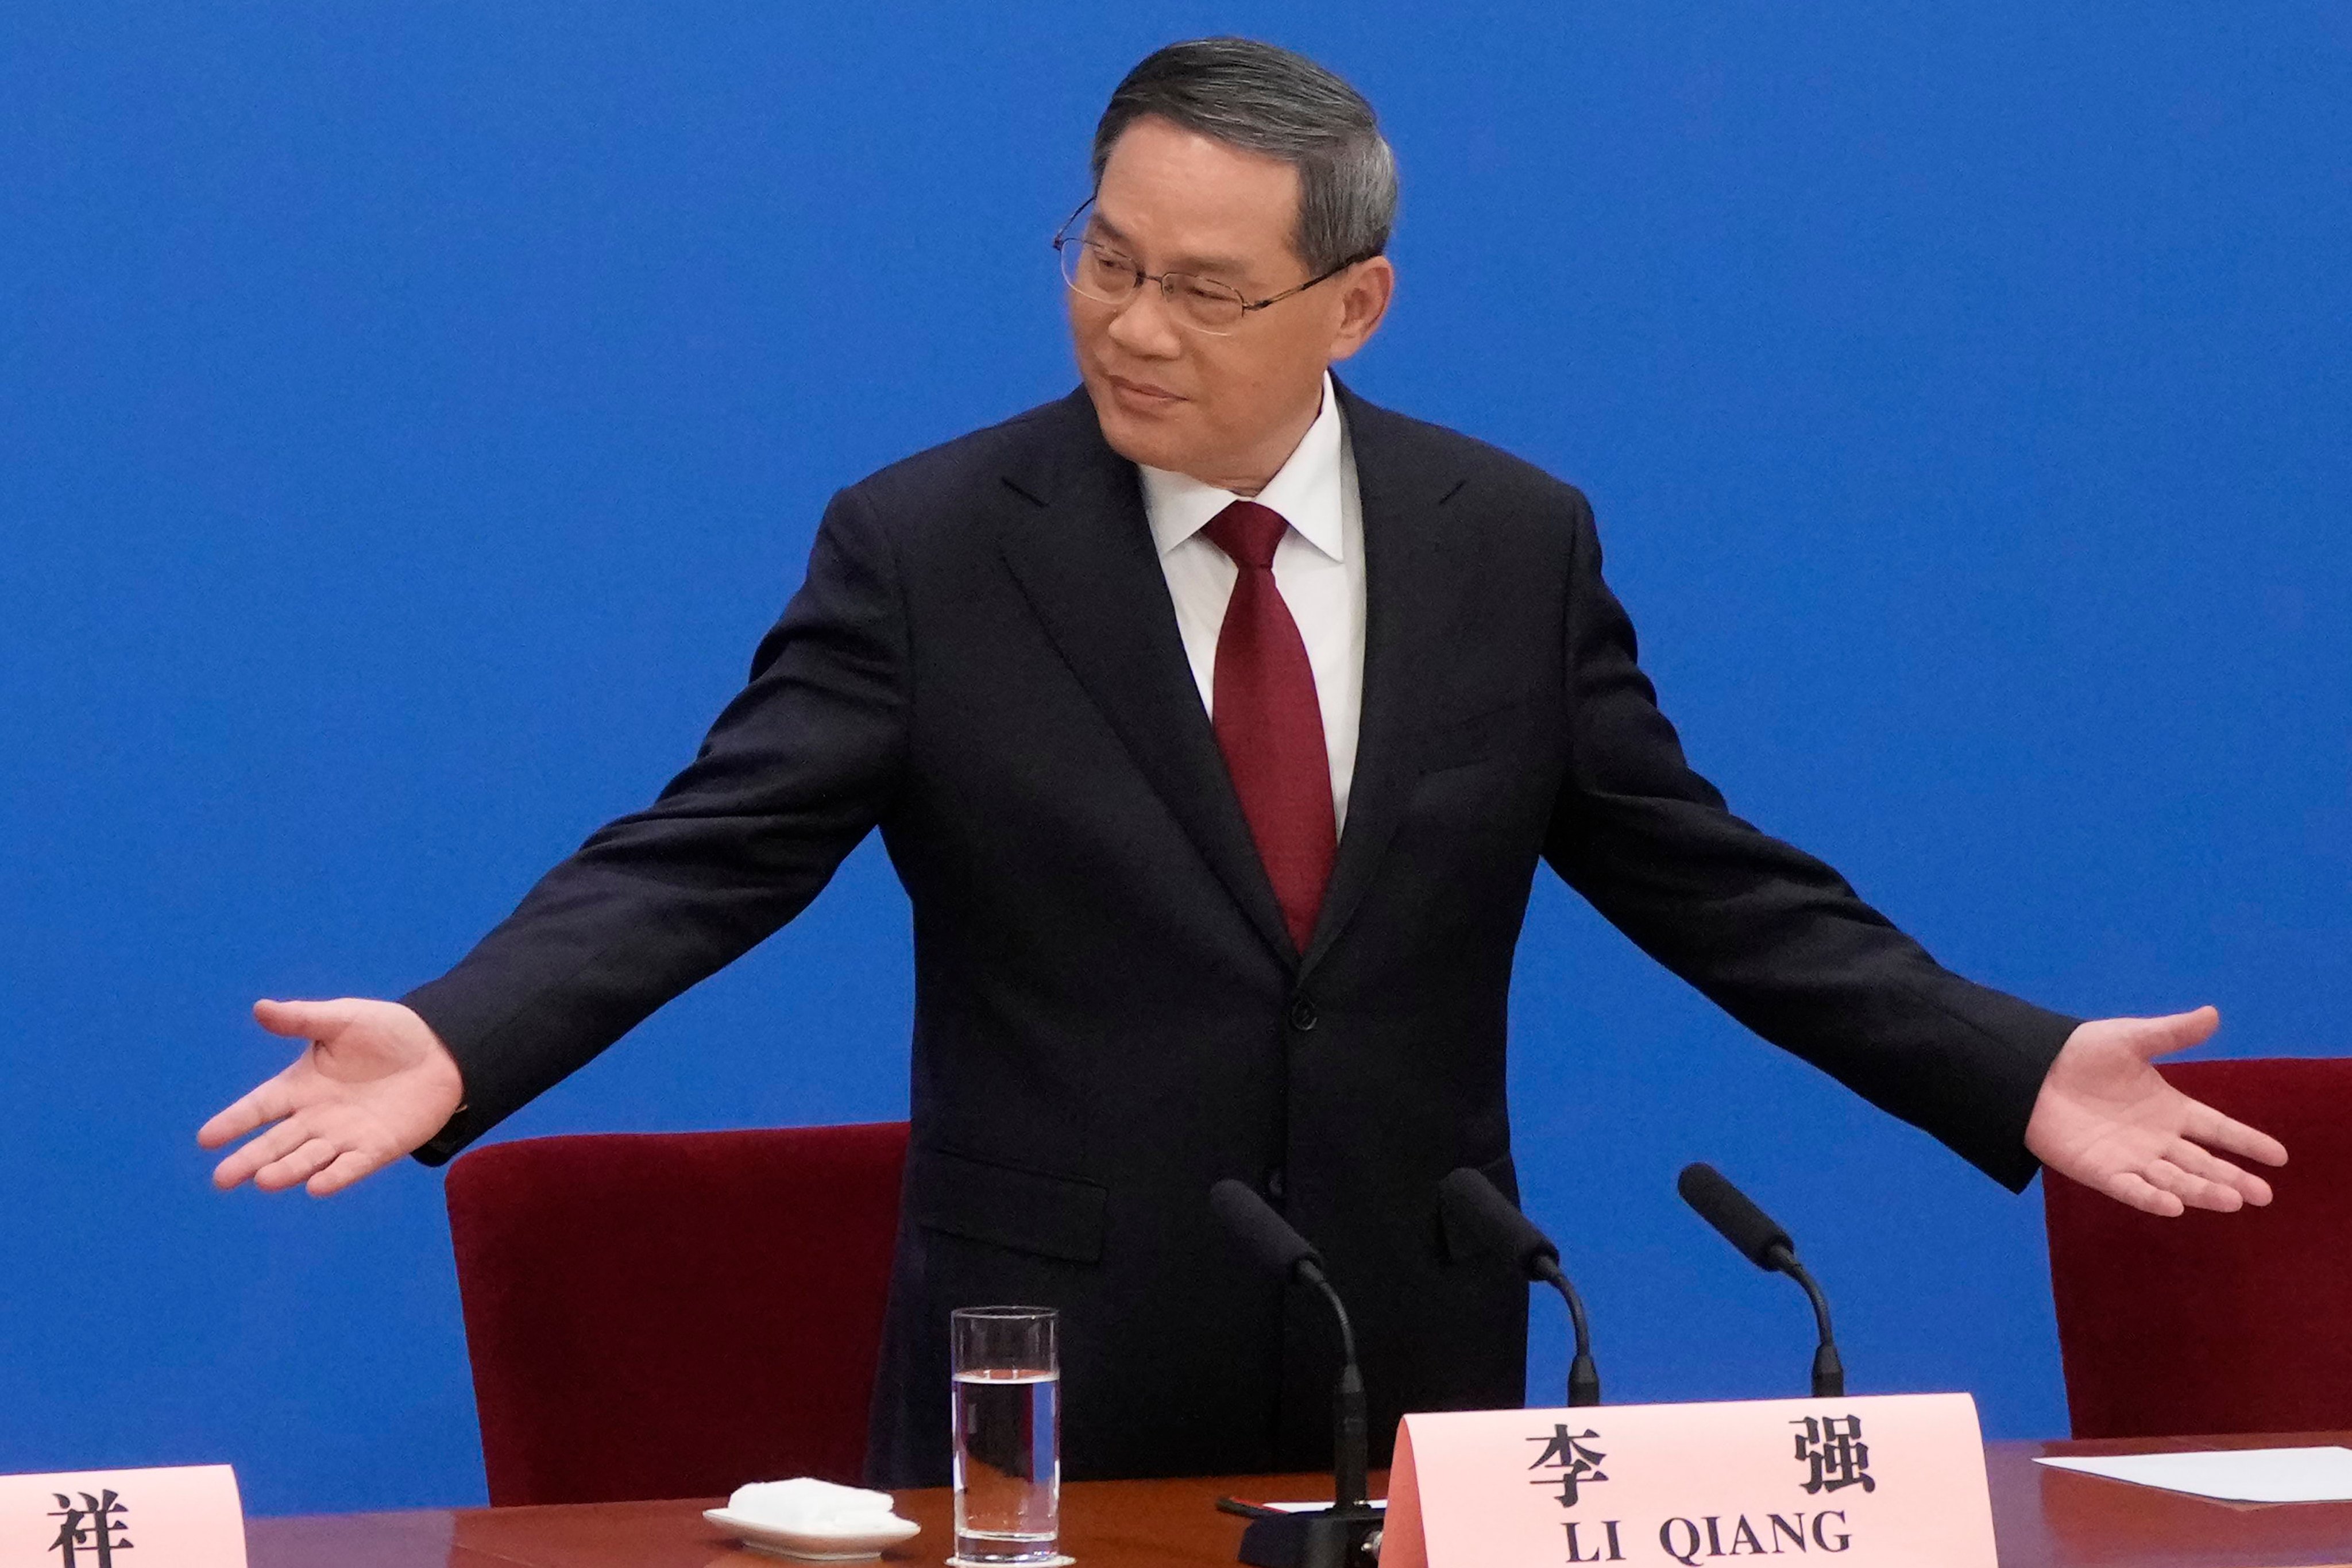 Chinese Premier Li Qiang, gestures as he arrives for a press conference after the closing ceremony for China’s National People’s Congress (NPC) at the Great Hall of the People in Beijing on March 13. Photo: AP